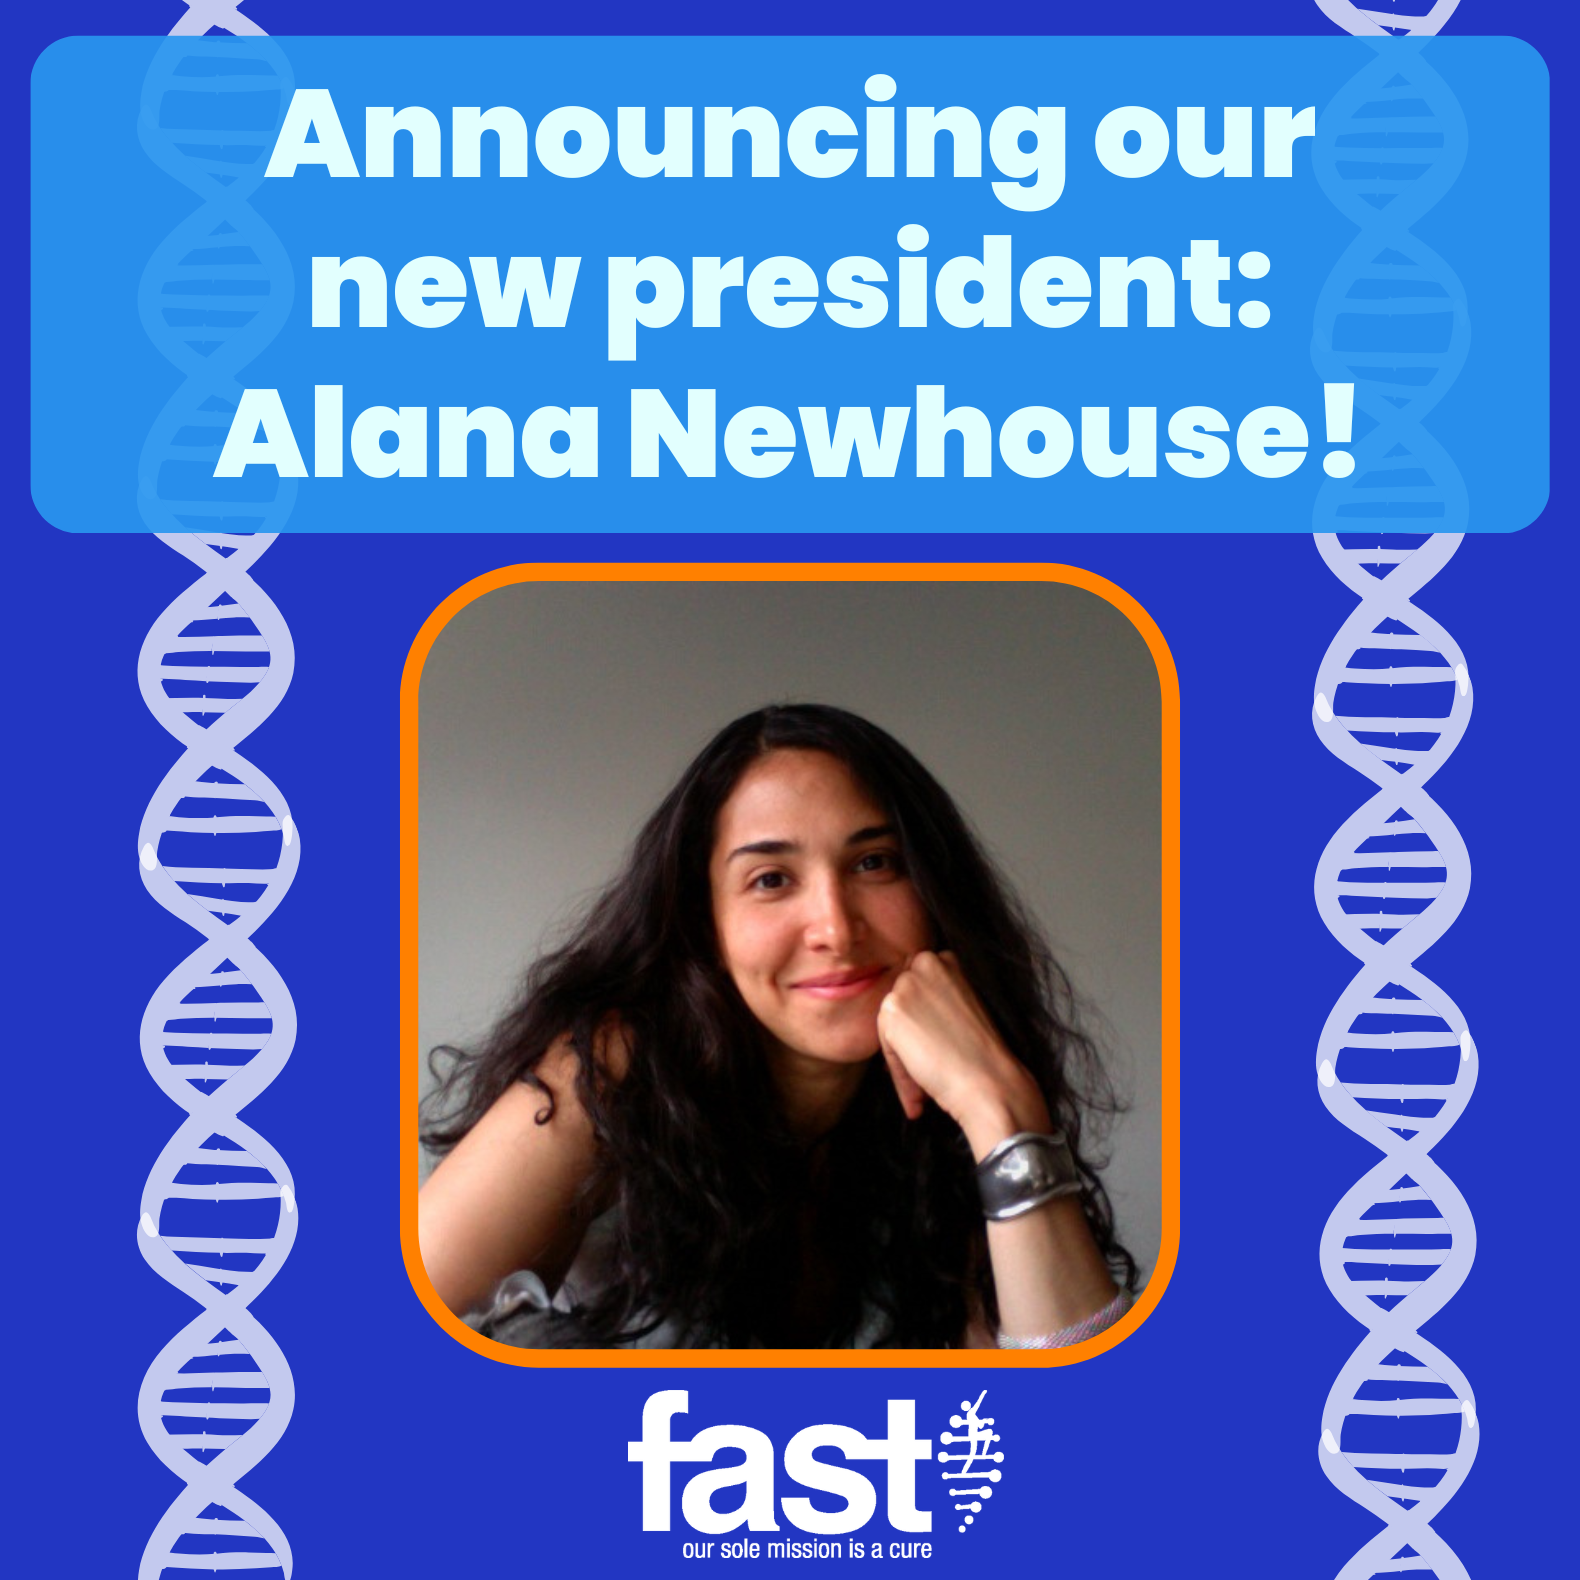 Announcing our new president: Alana Newhouse!